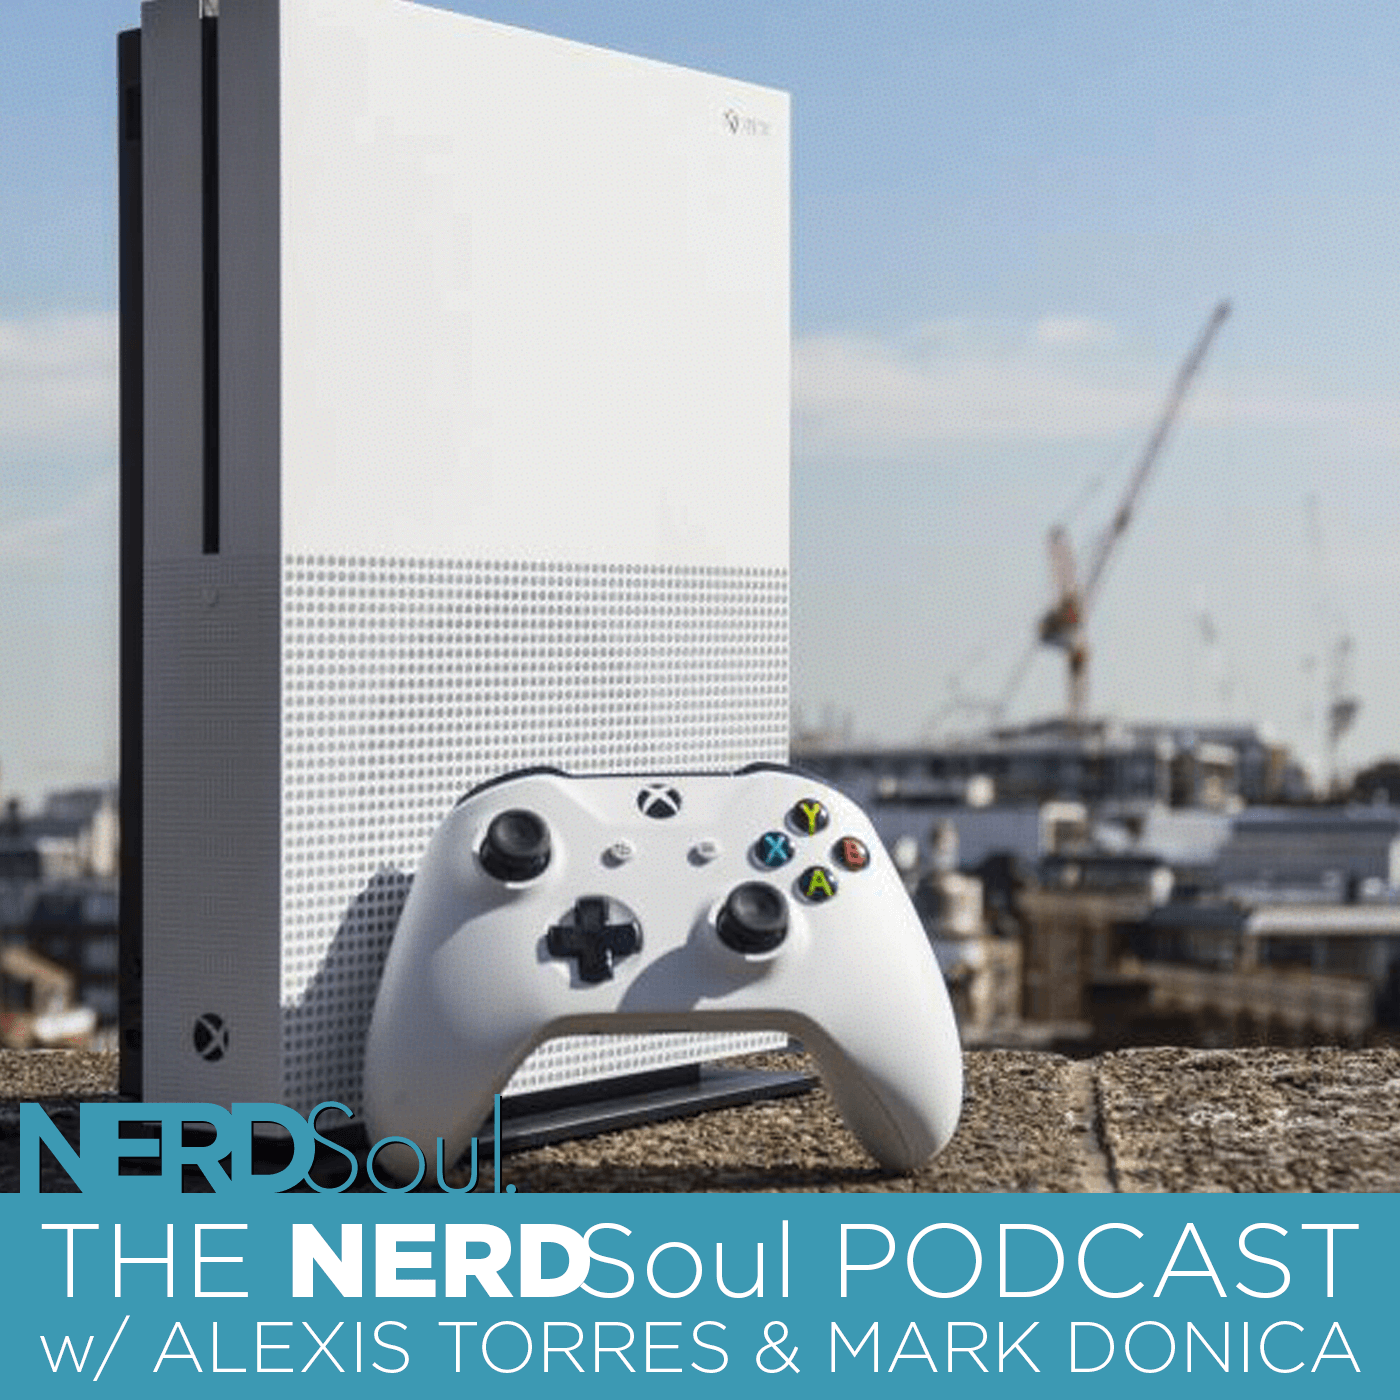 Star Wars Resistance Looks Promising, XBox All Access Subscriptions, Crazy Rich Asians, Blade Turns 20 & More on The #NERDSoul #Podcast